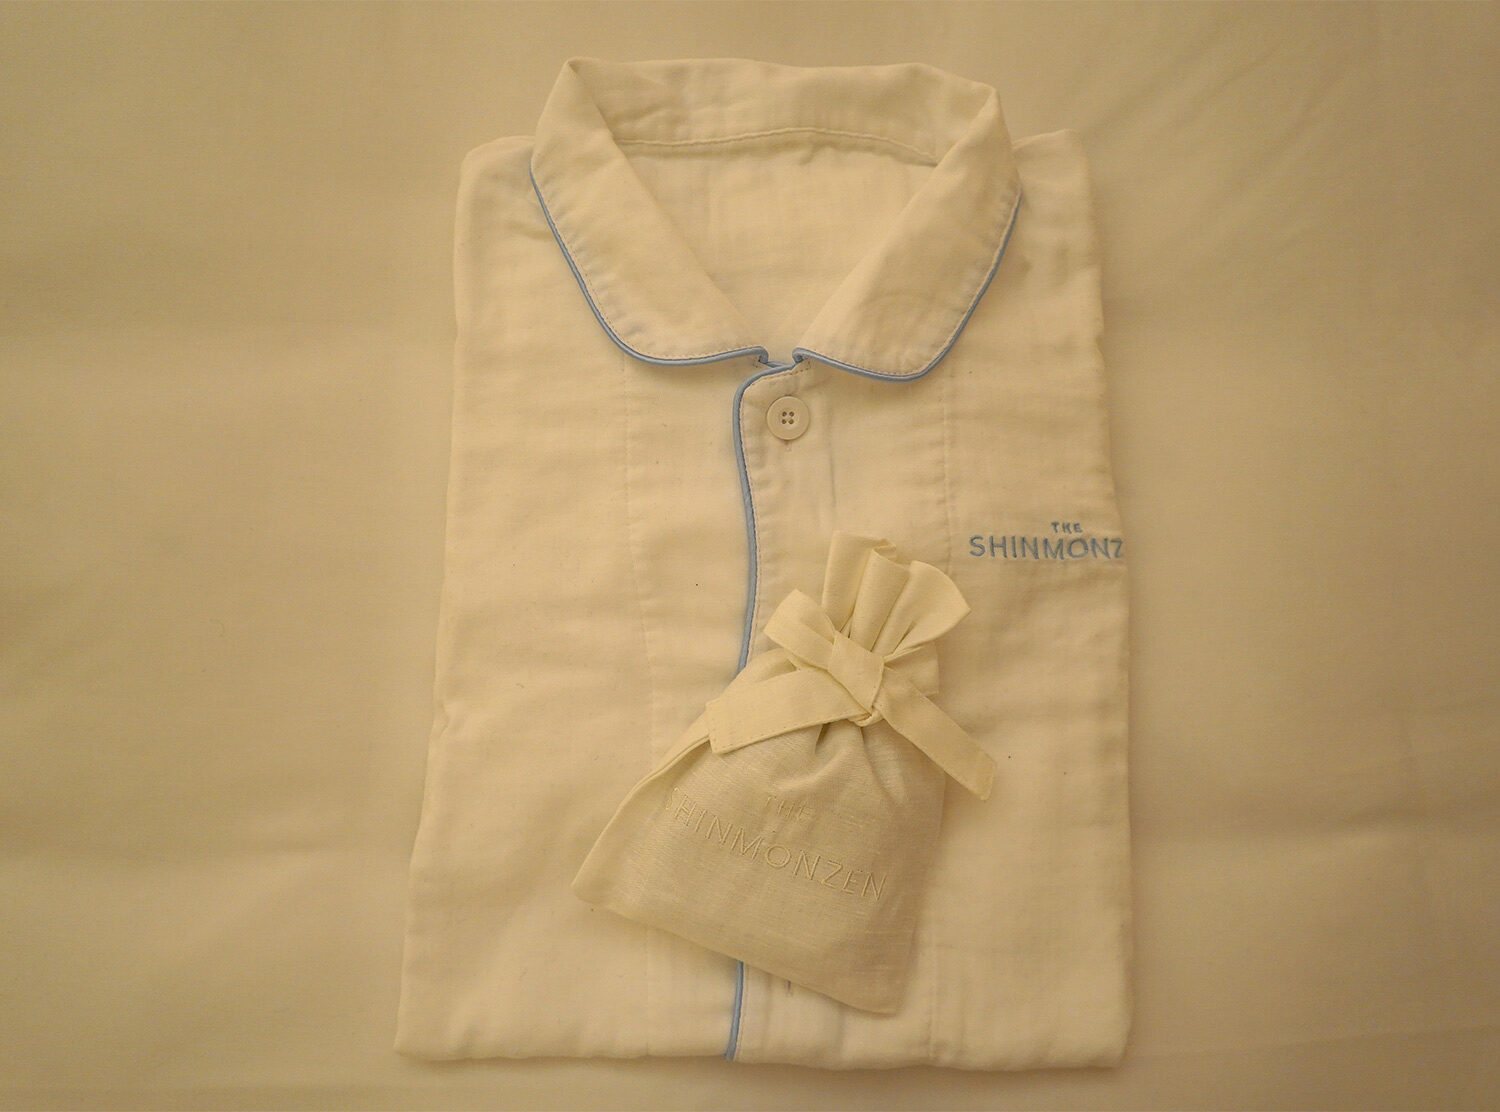 The Shinmonzen Cozy, his and her pajamas delicately placed on our bed, unexpected and charming